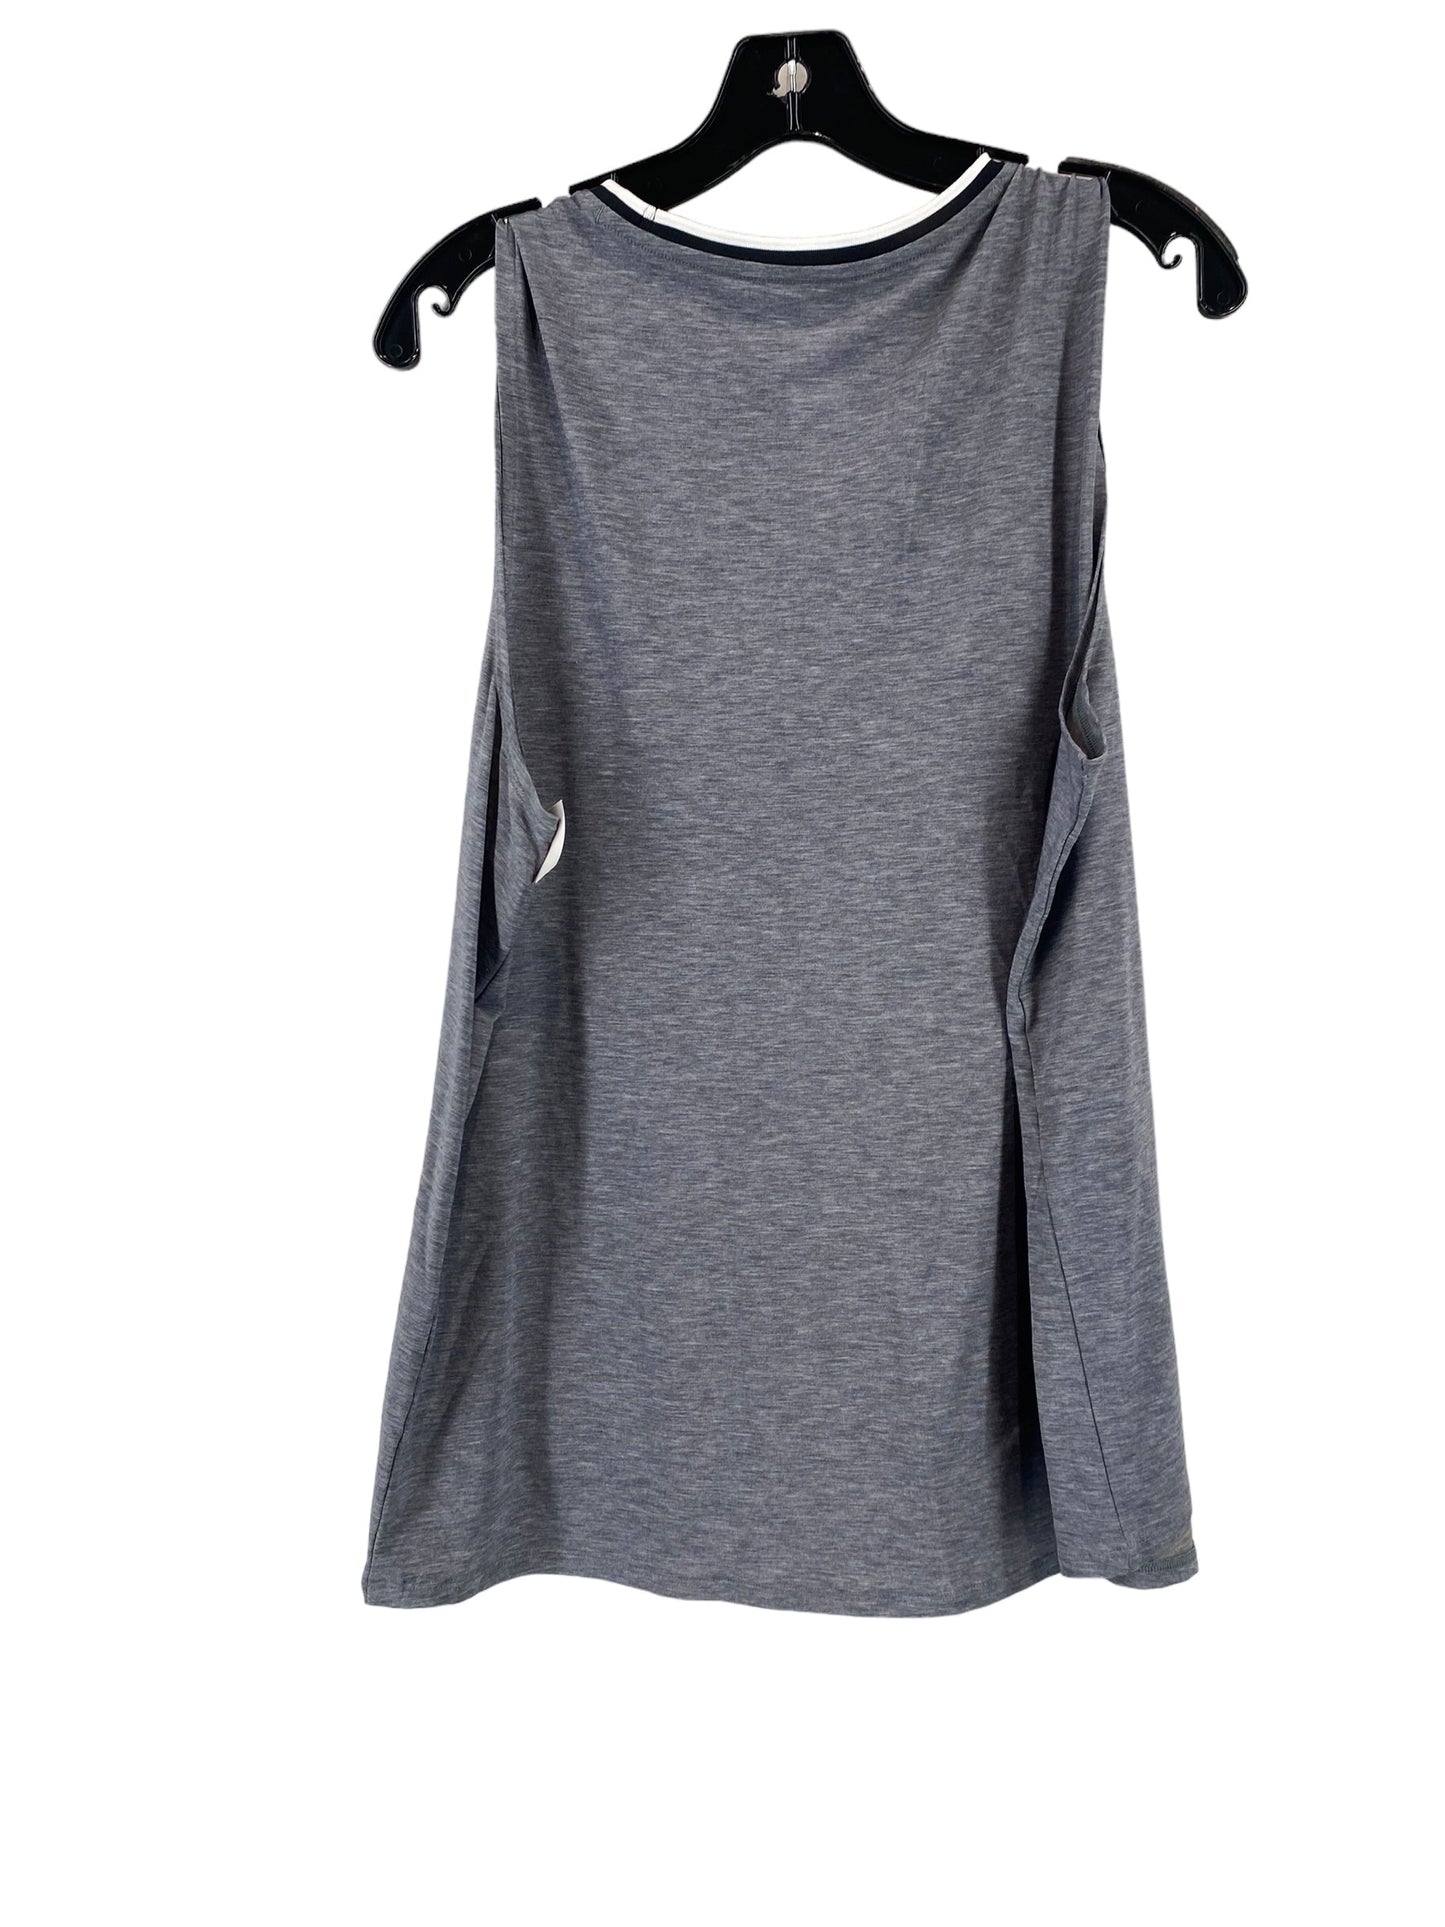 Grey Tank Top Under Armour, Size L